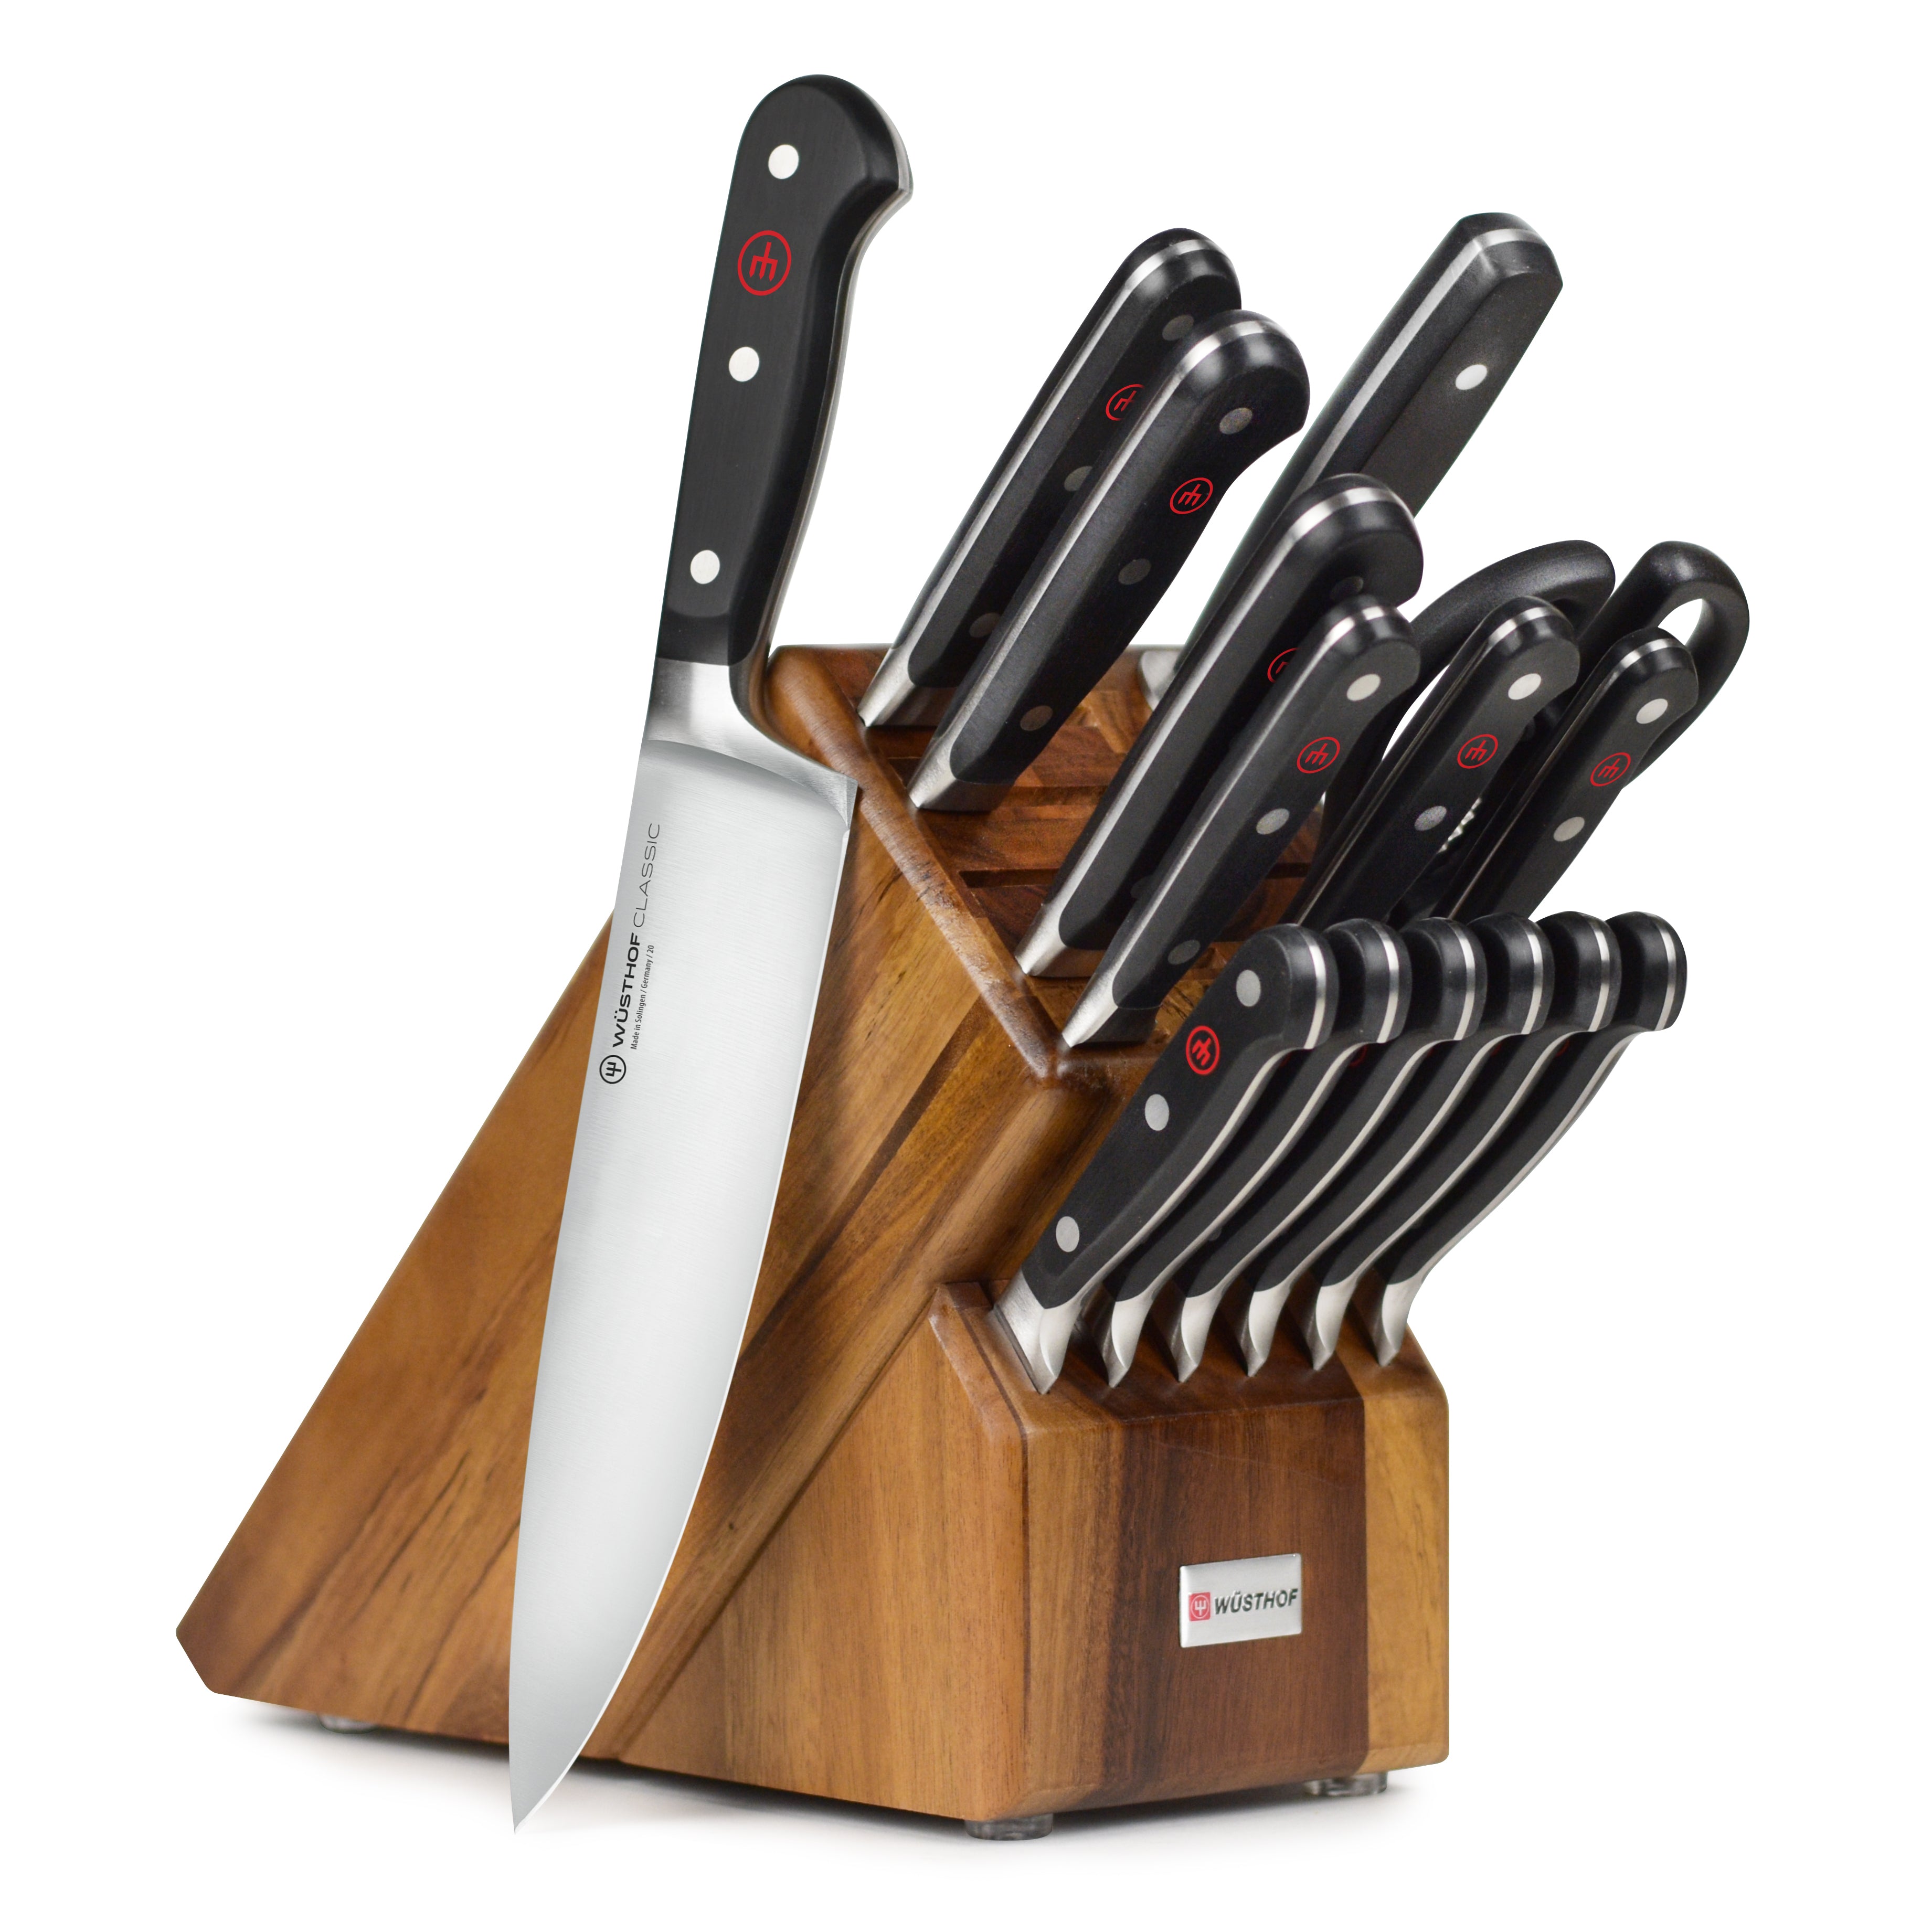 16 Pieces Stainless Steel Knife Block Set